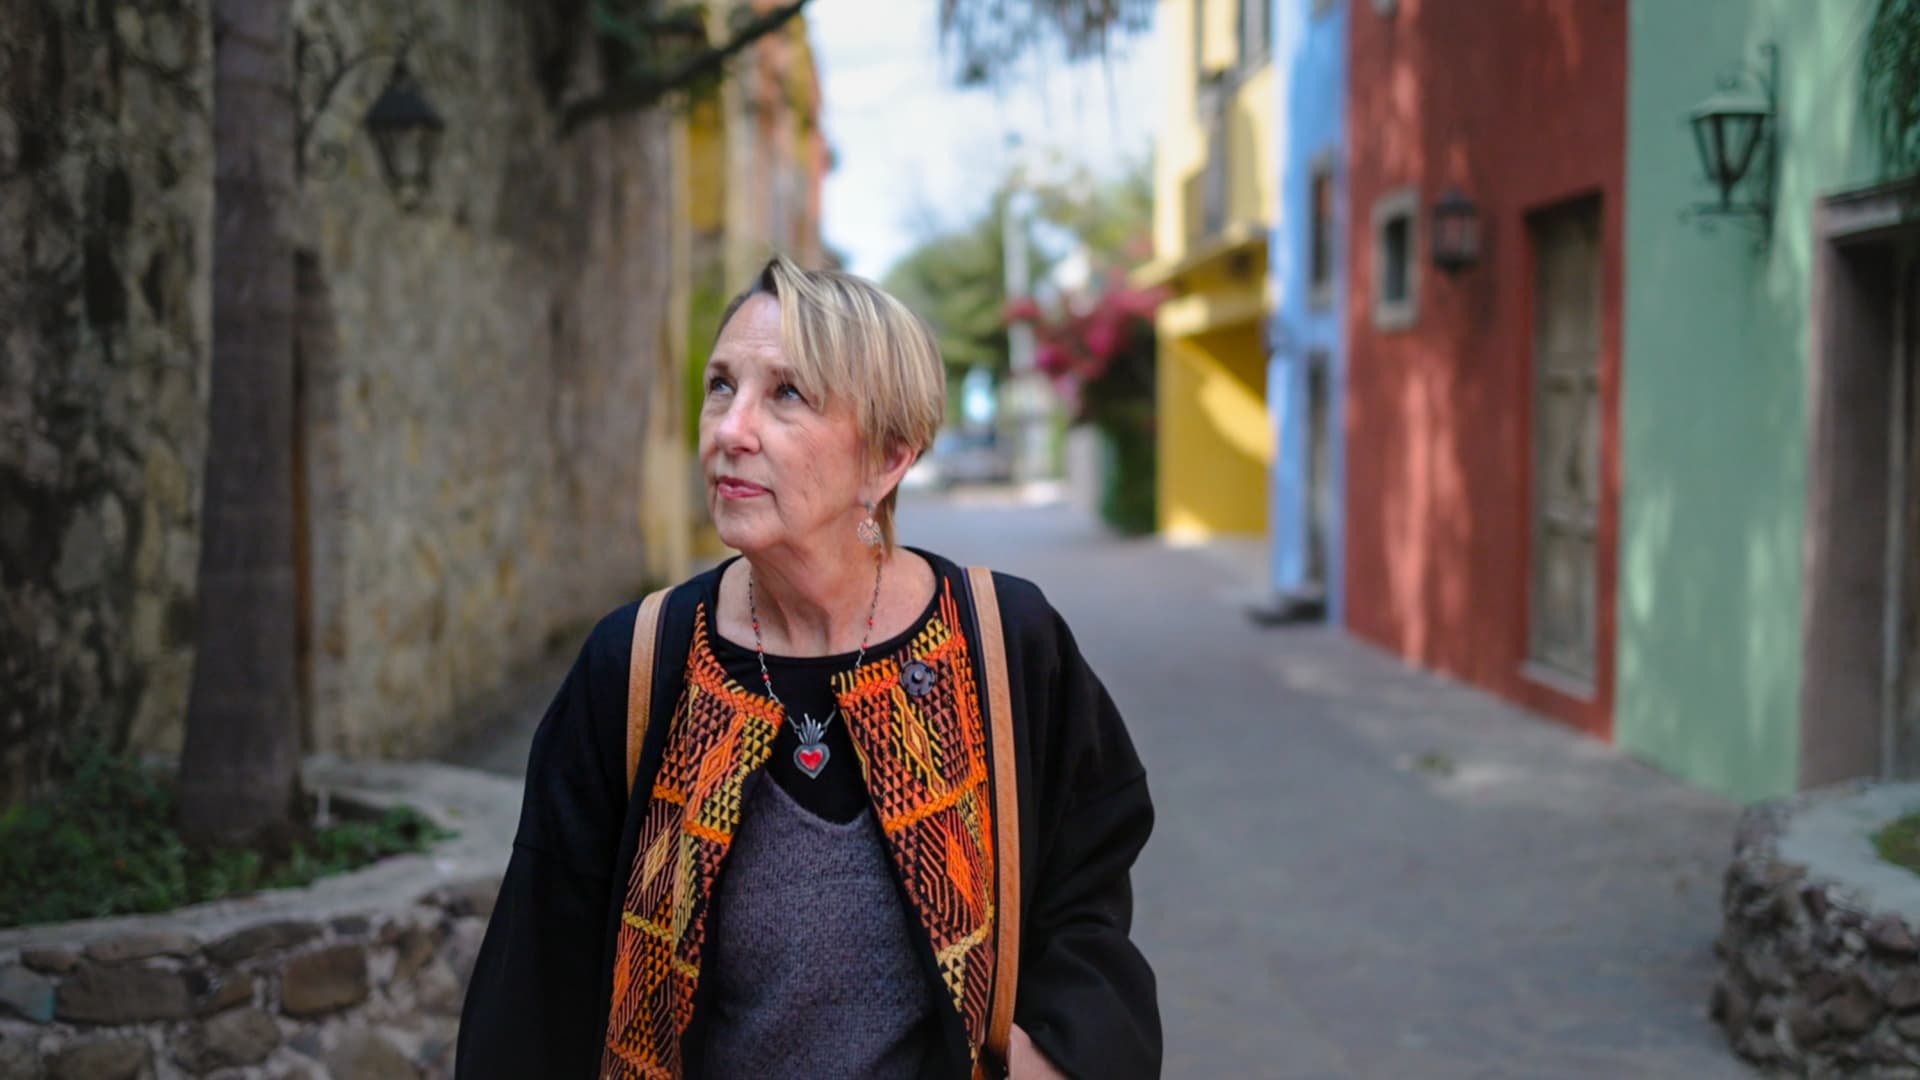 Glen Rogers lives on $620 per month in San Miguel de Allende, where she bought a home for $160,000 in 2002.